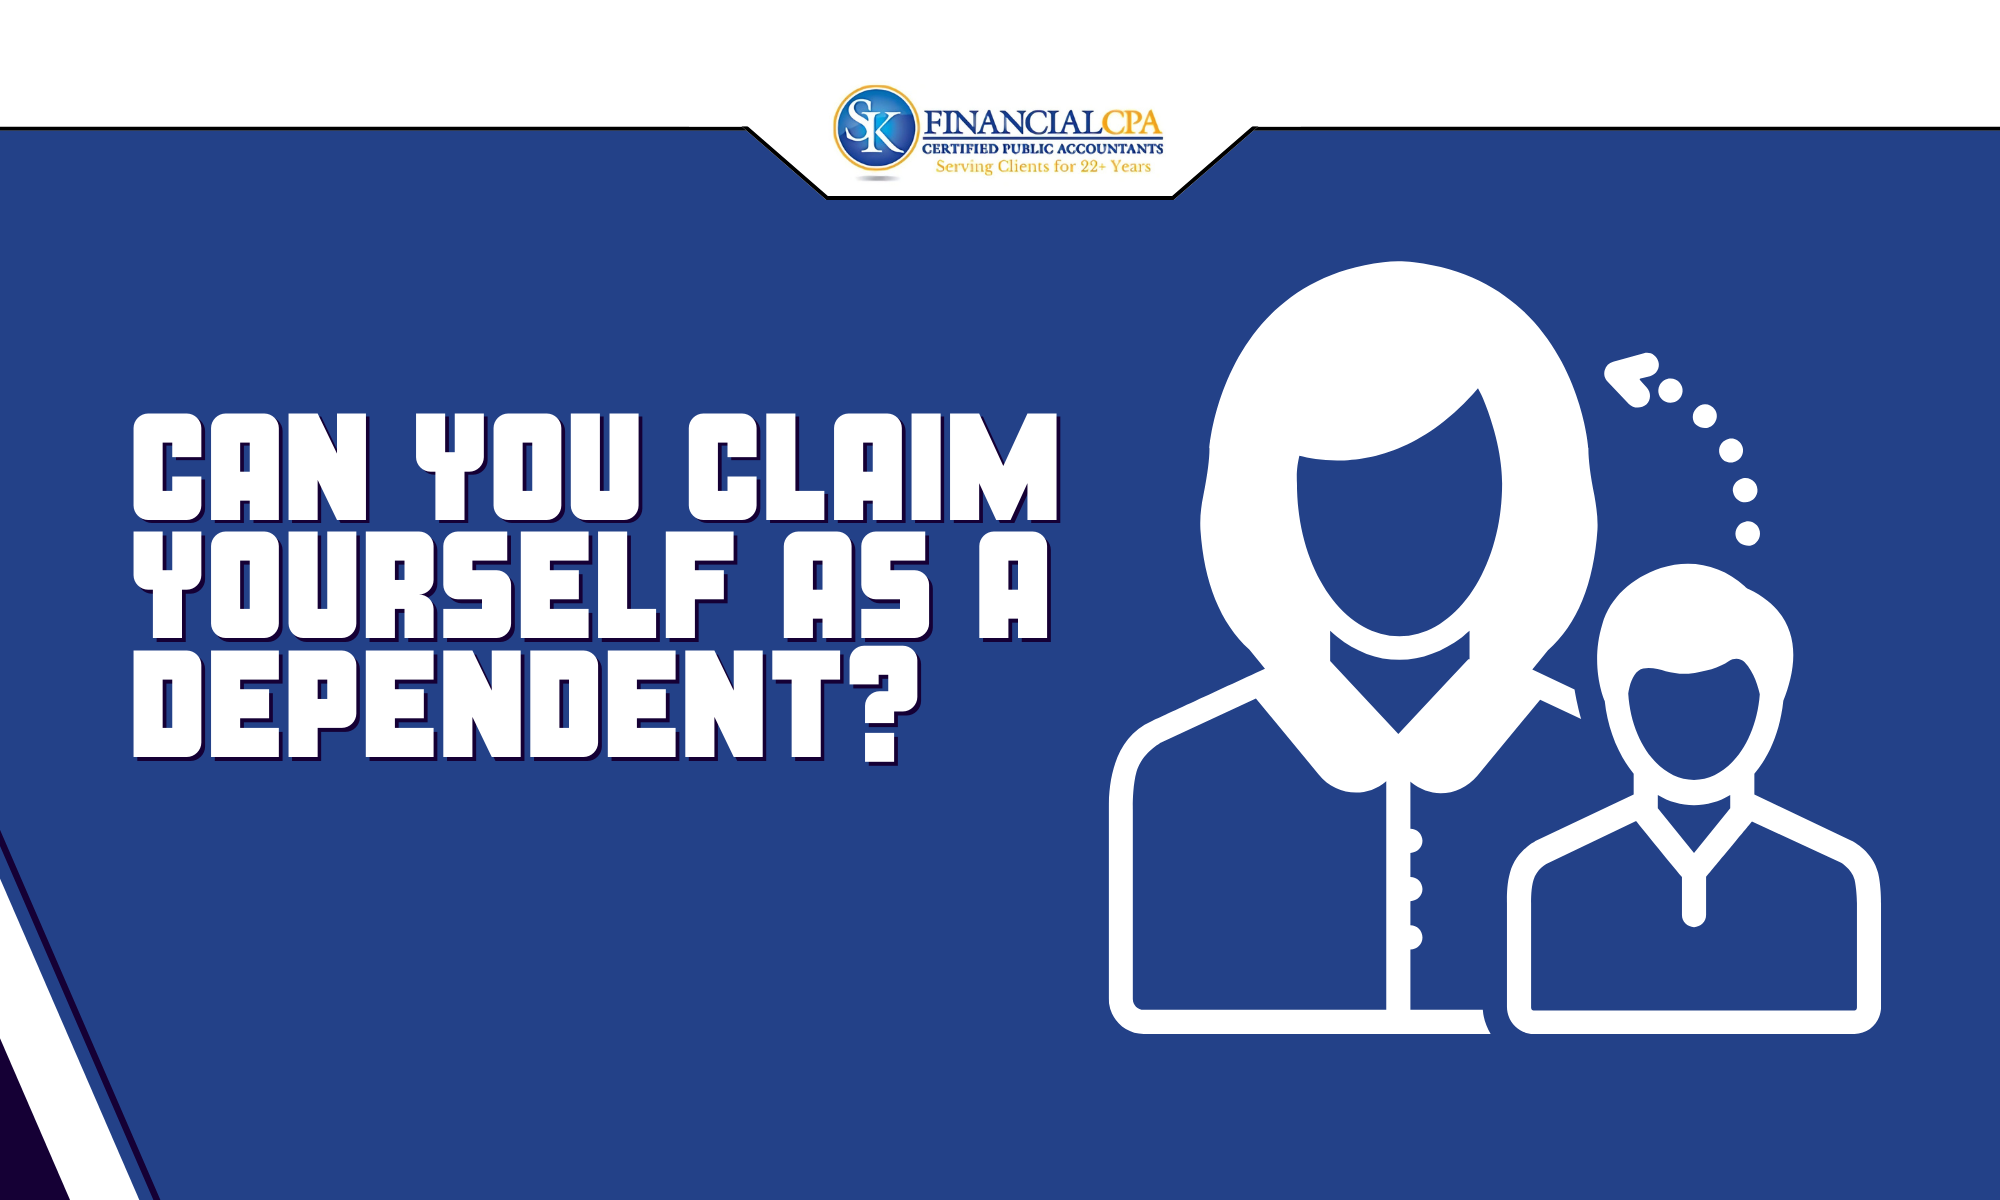 Can You Claim Yourself as a Dependent? What Are the Benefits?